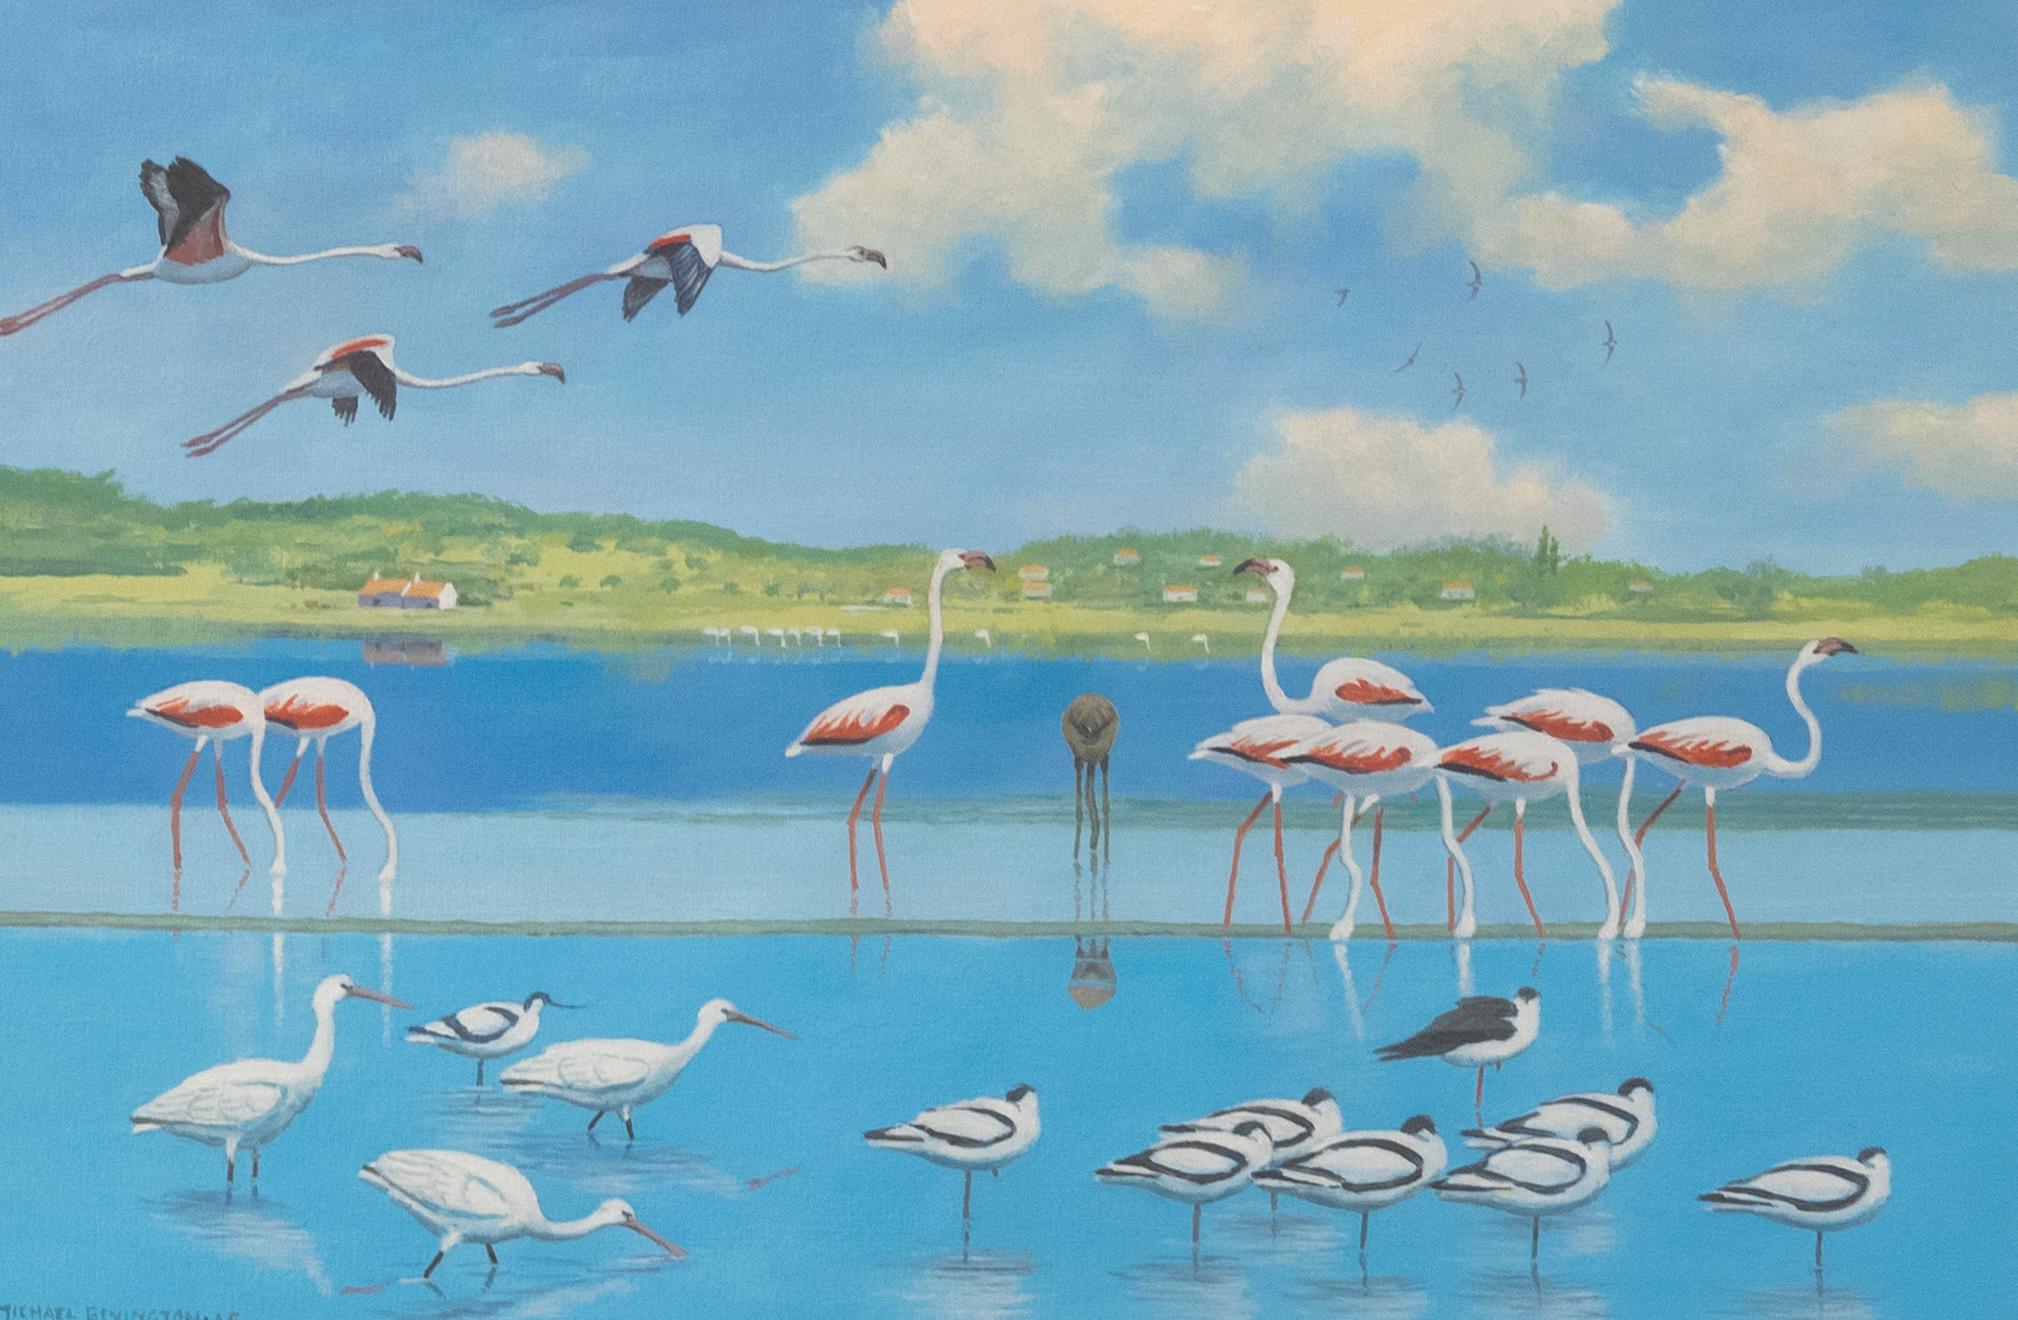 Michael Benington - Framed Contemporary Oil, High Noon-Flamingos - Painting by Unknown